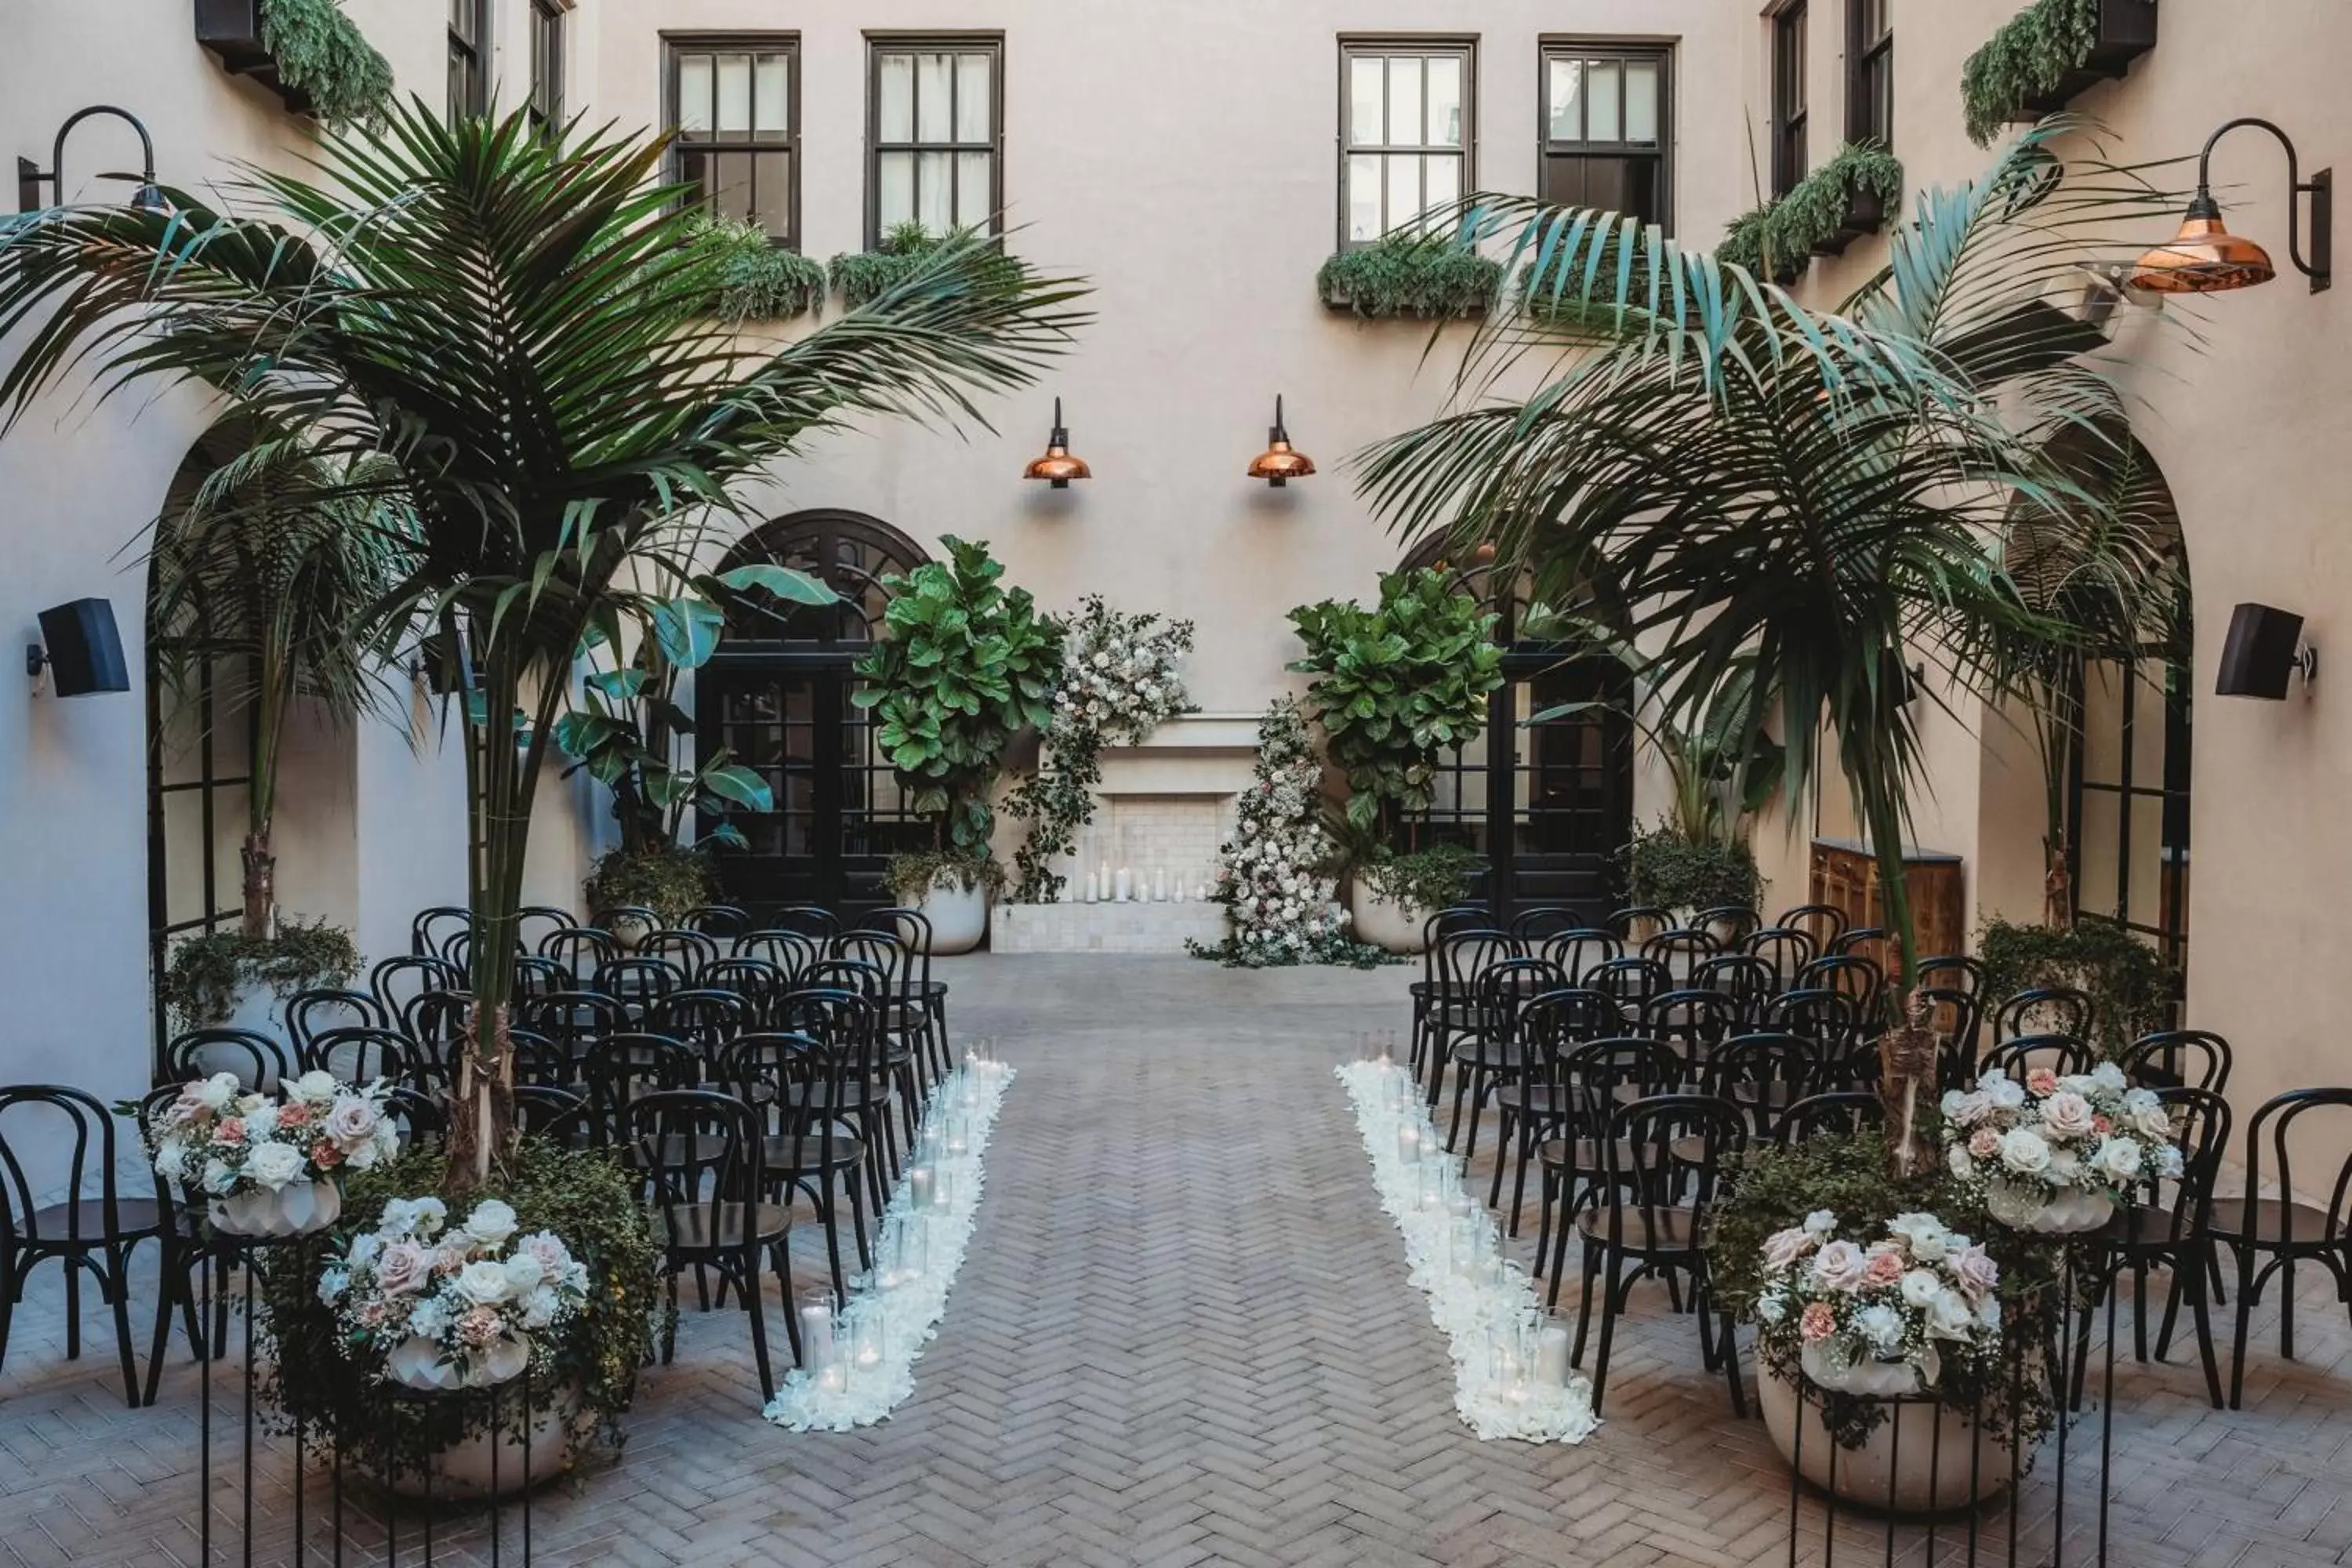 Property building in The Guild Hotel, San Diego, a Tribute Portfolio Hotel